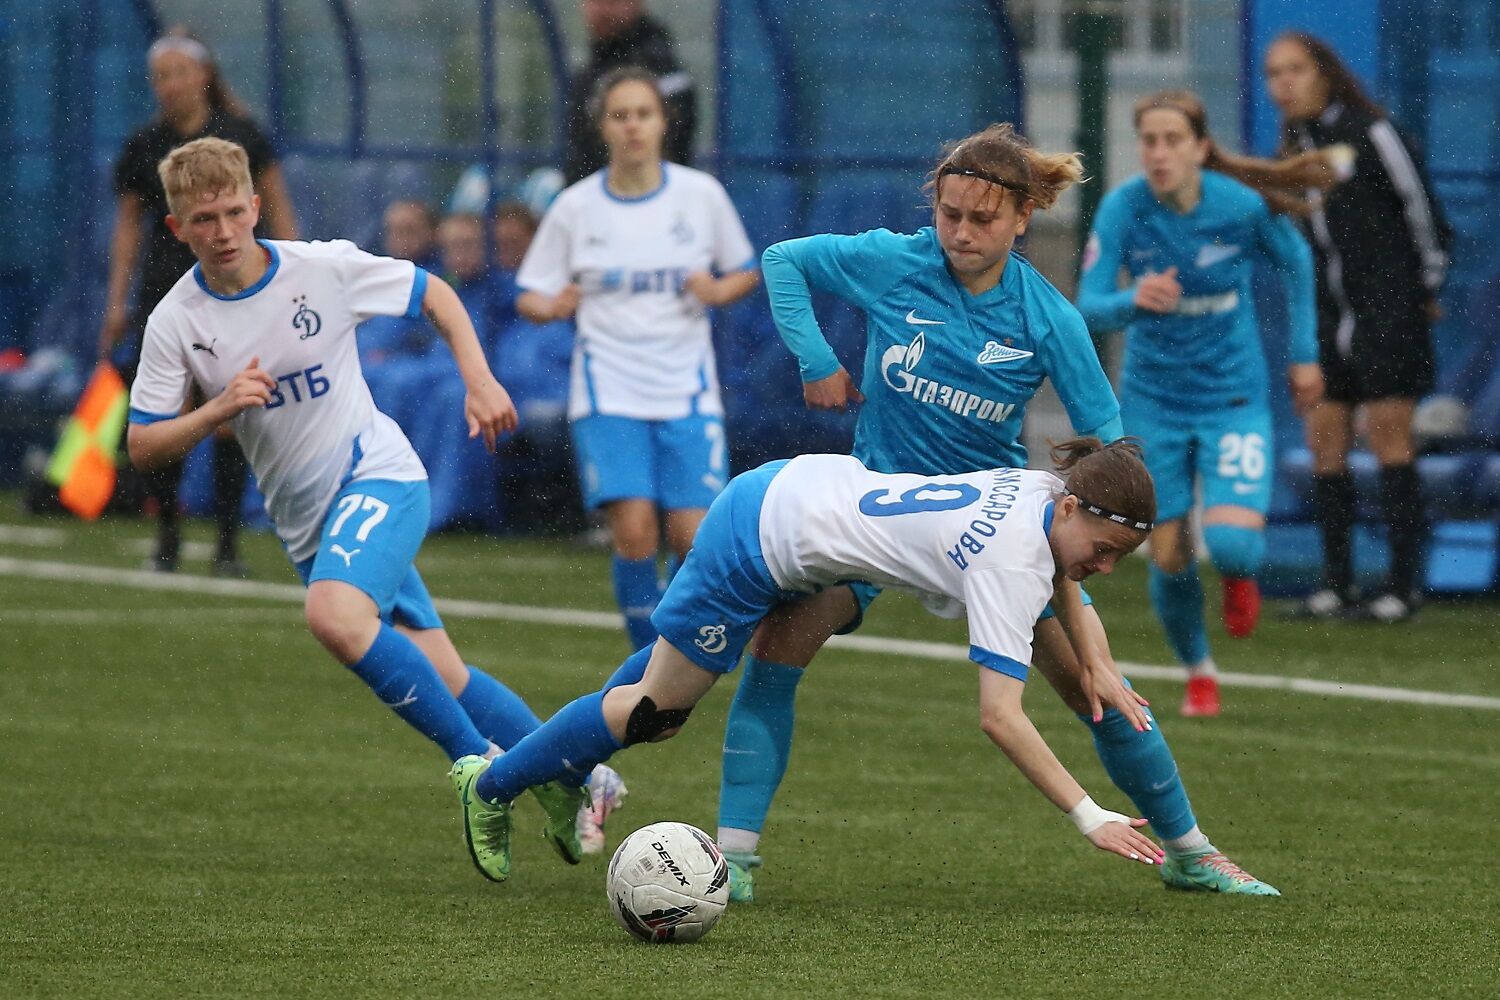 Photo gallery from match against Zenit